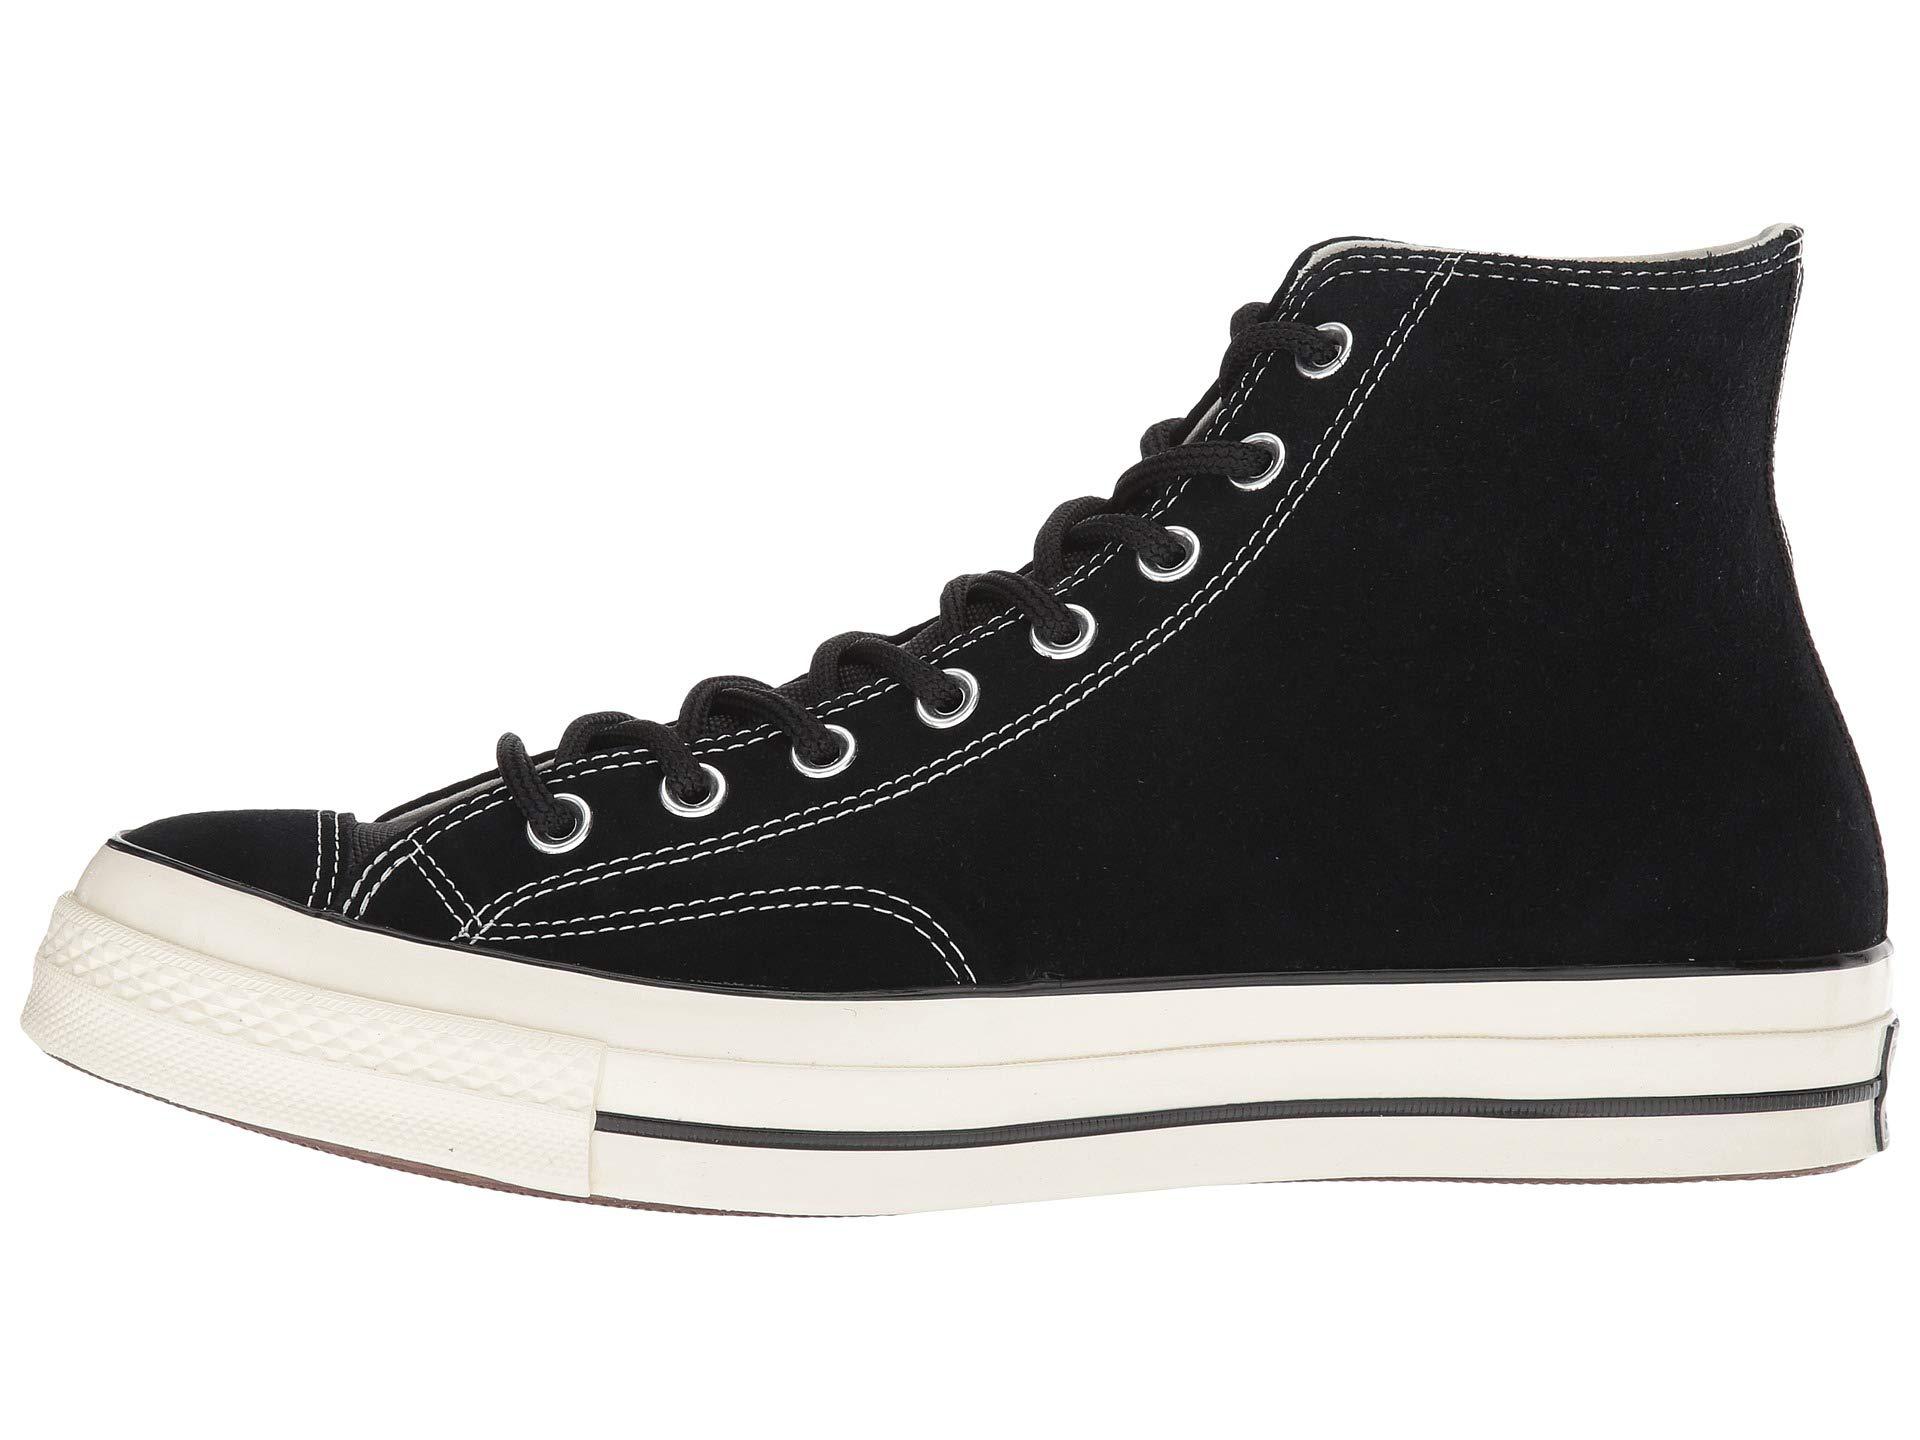 Lyst - Converse Chuck Taylor 70 Hi Base Camp Suede Sneakers in Black ...